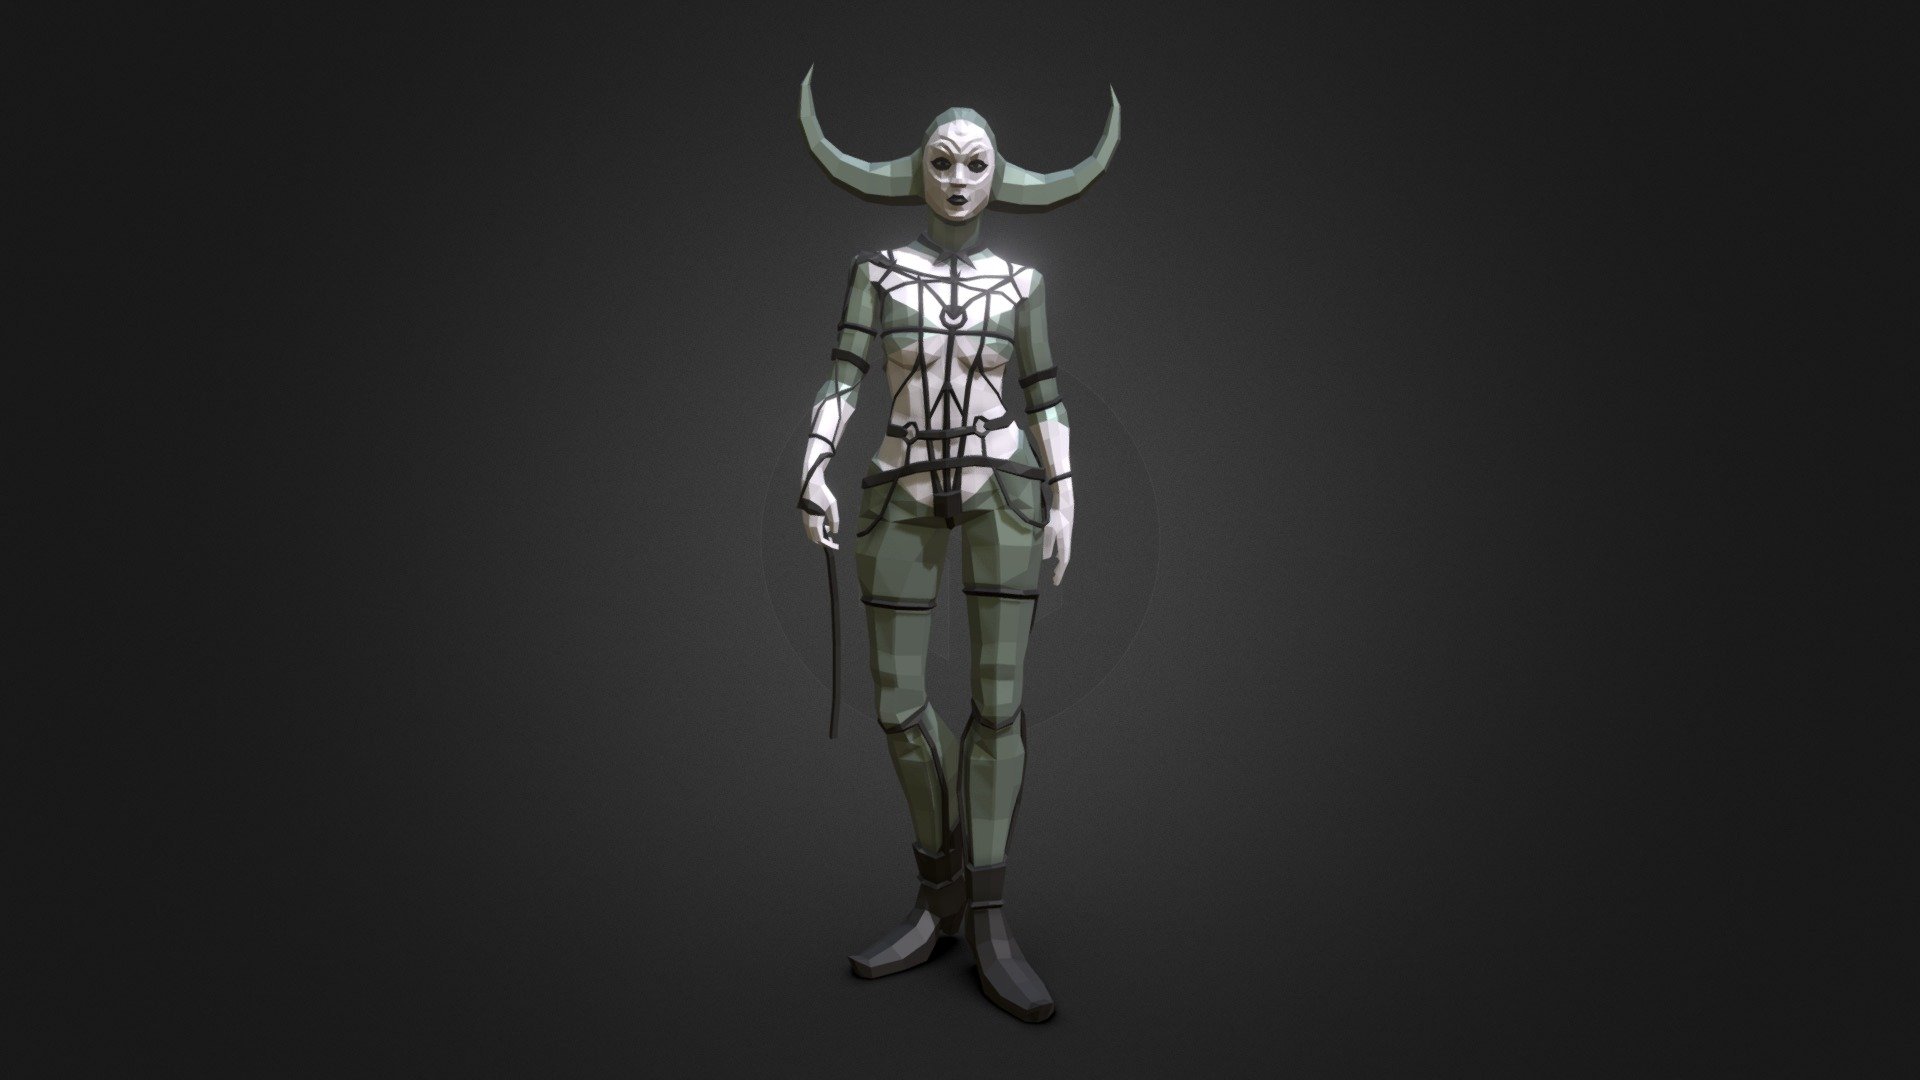 Finally getting started with my Rebel Moon models, since the first nearly-full look at a character has been revealed. This series will continue, but it starts here with this unnamed alien, portrayed by Jordan Coleman 3d model